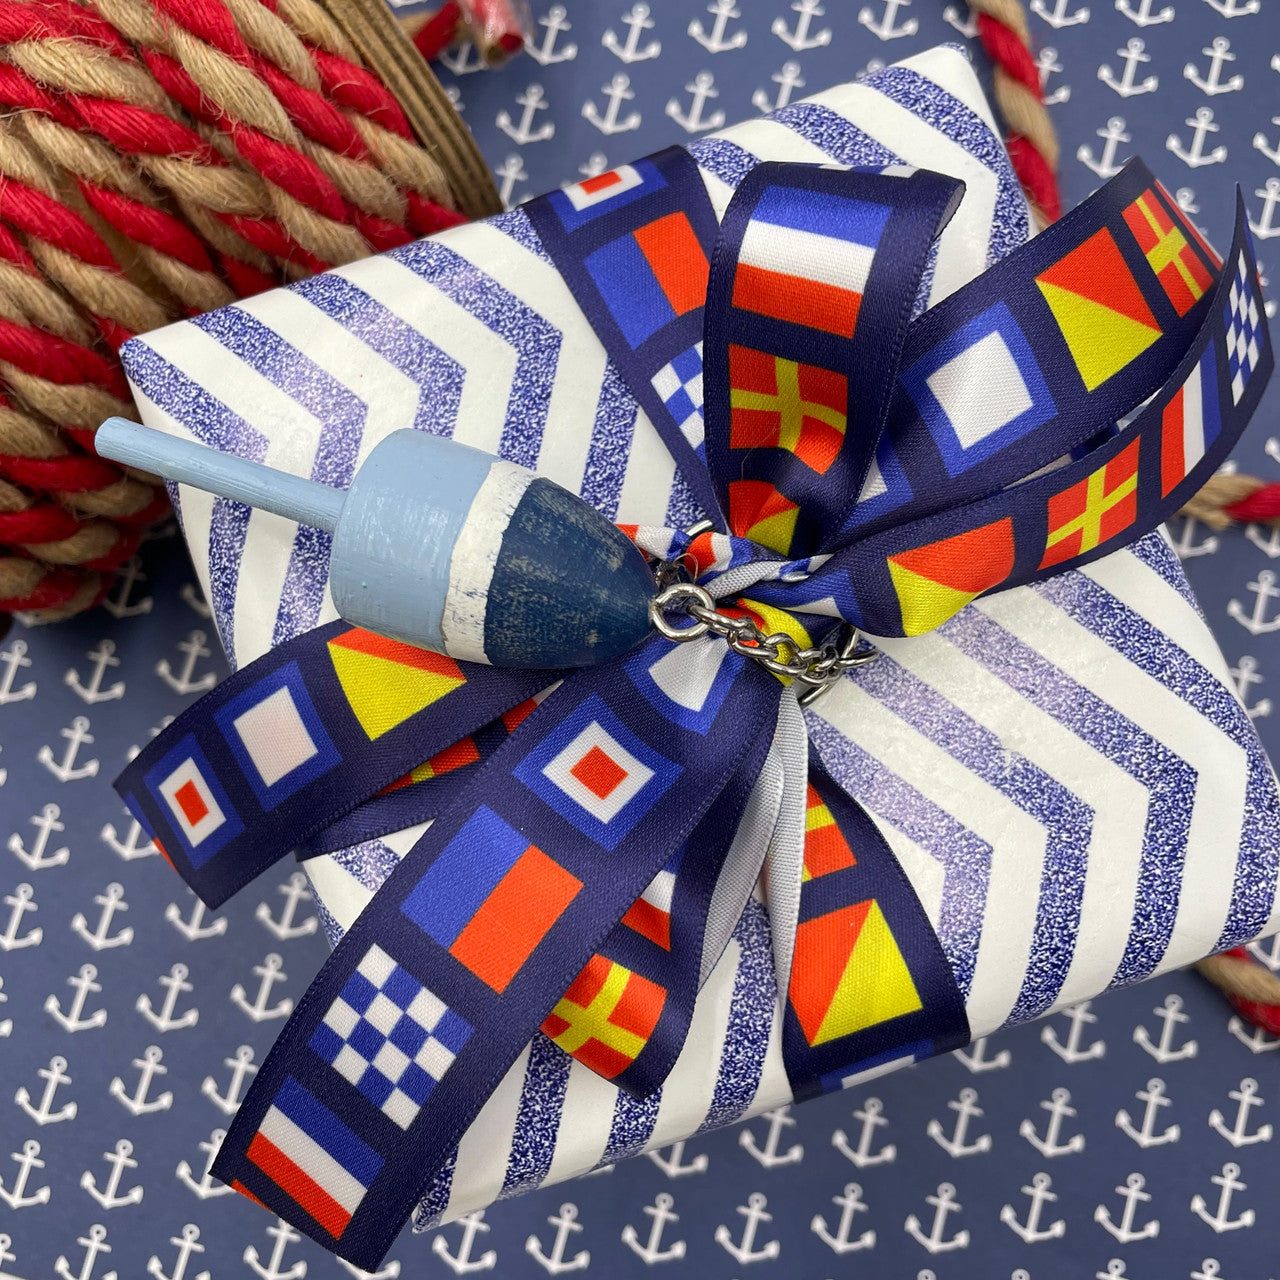 Tie a lovely gift with our Nautical Flags ribbon to signal your favorite person just special they are! 